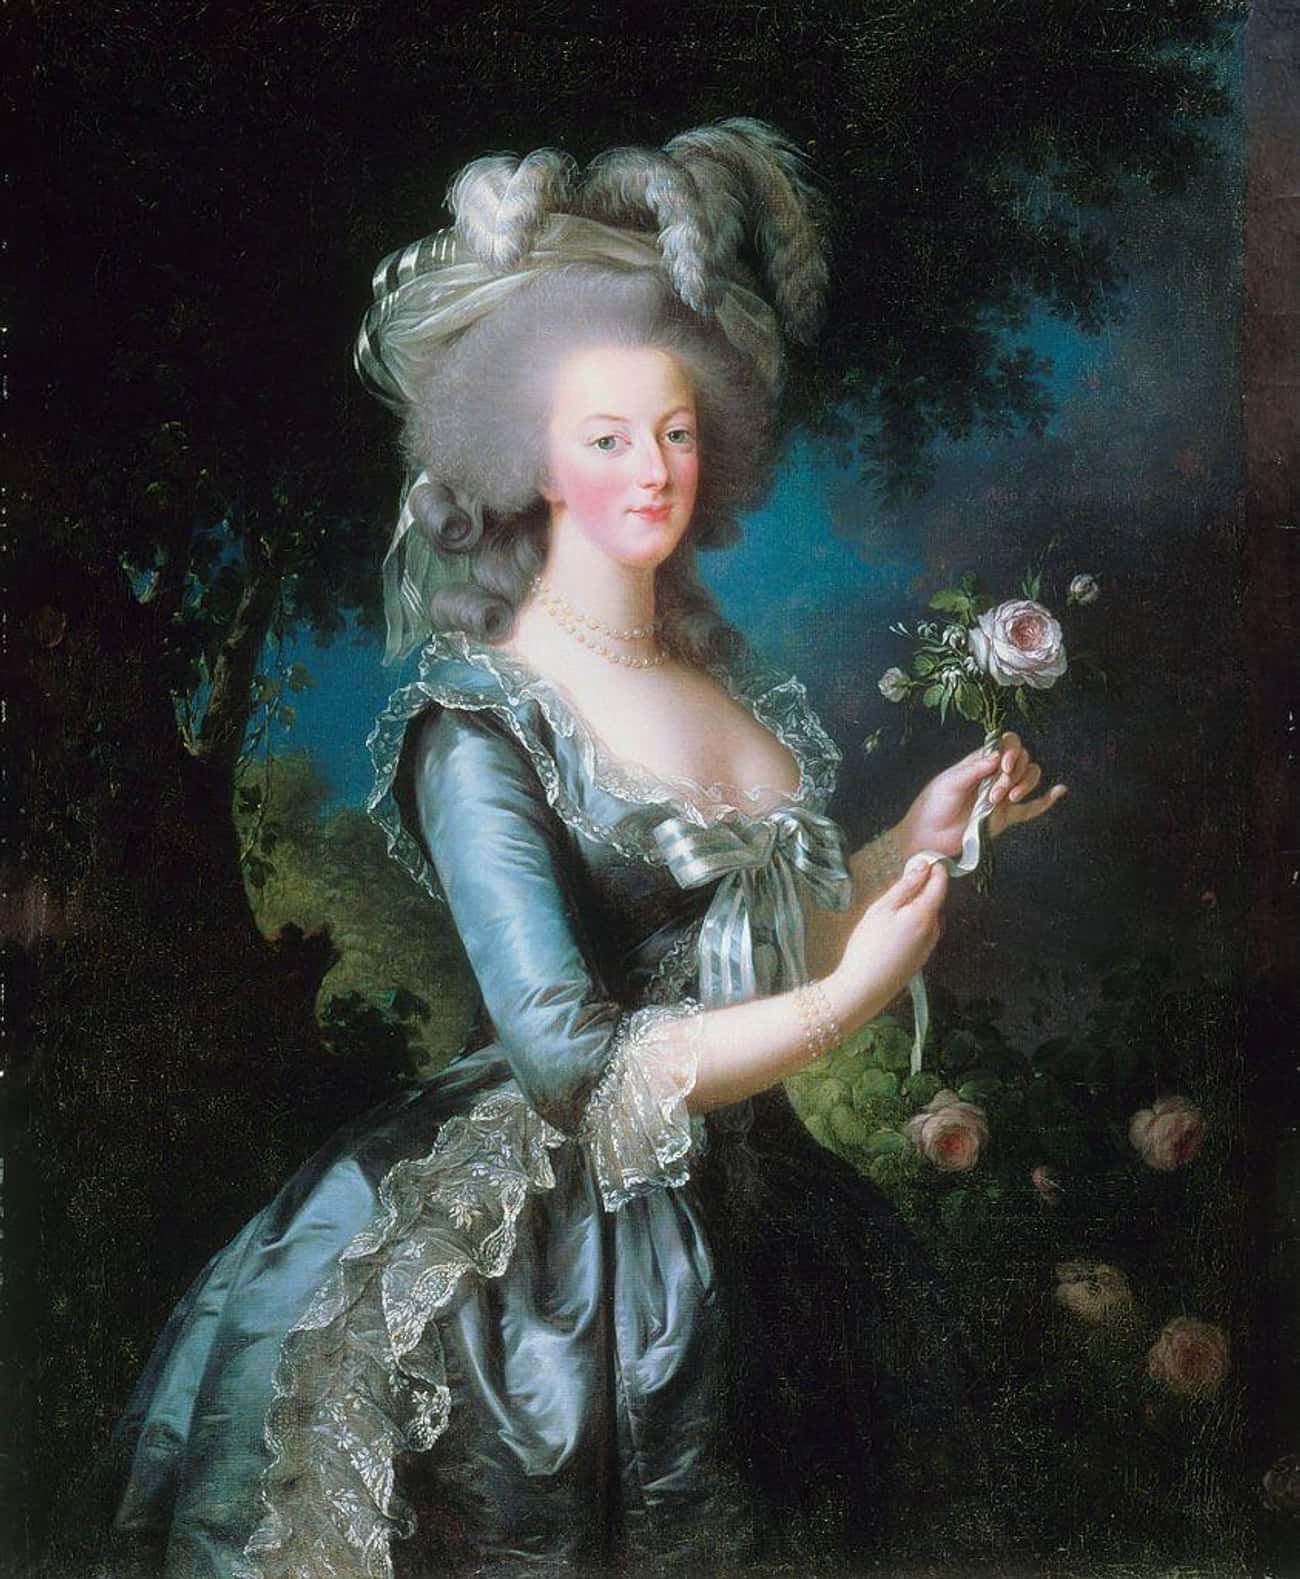 Marie Antoinette Was 'Well-Set... Without However Being Disfigured By That Austrian Stiffness'